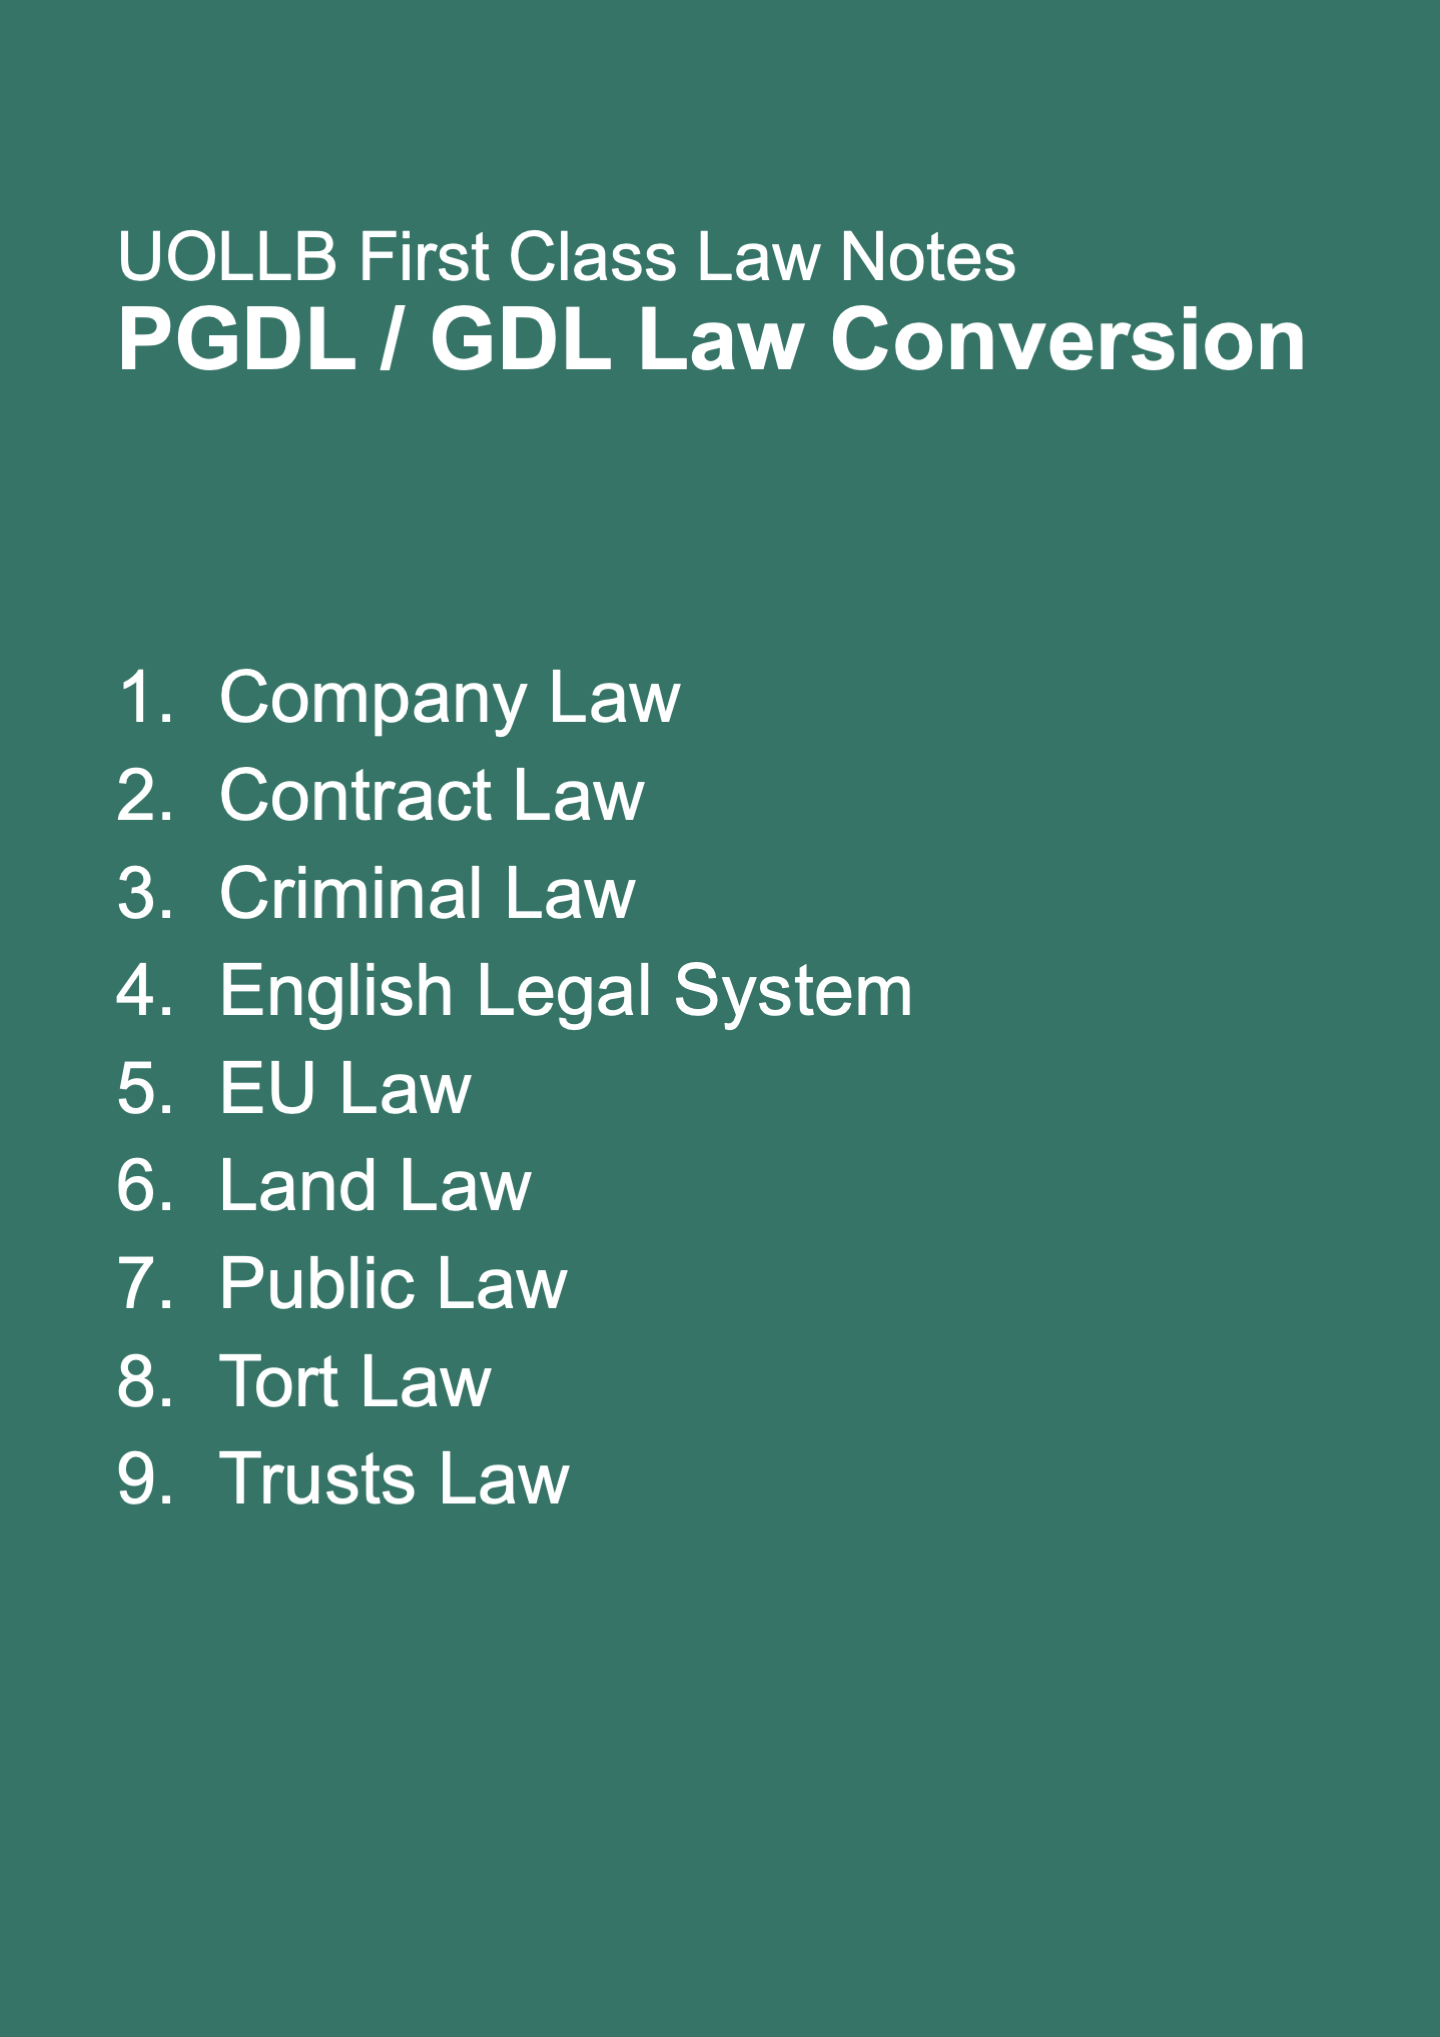 PGDL / GDL Law Conversion Package